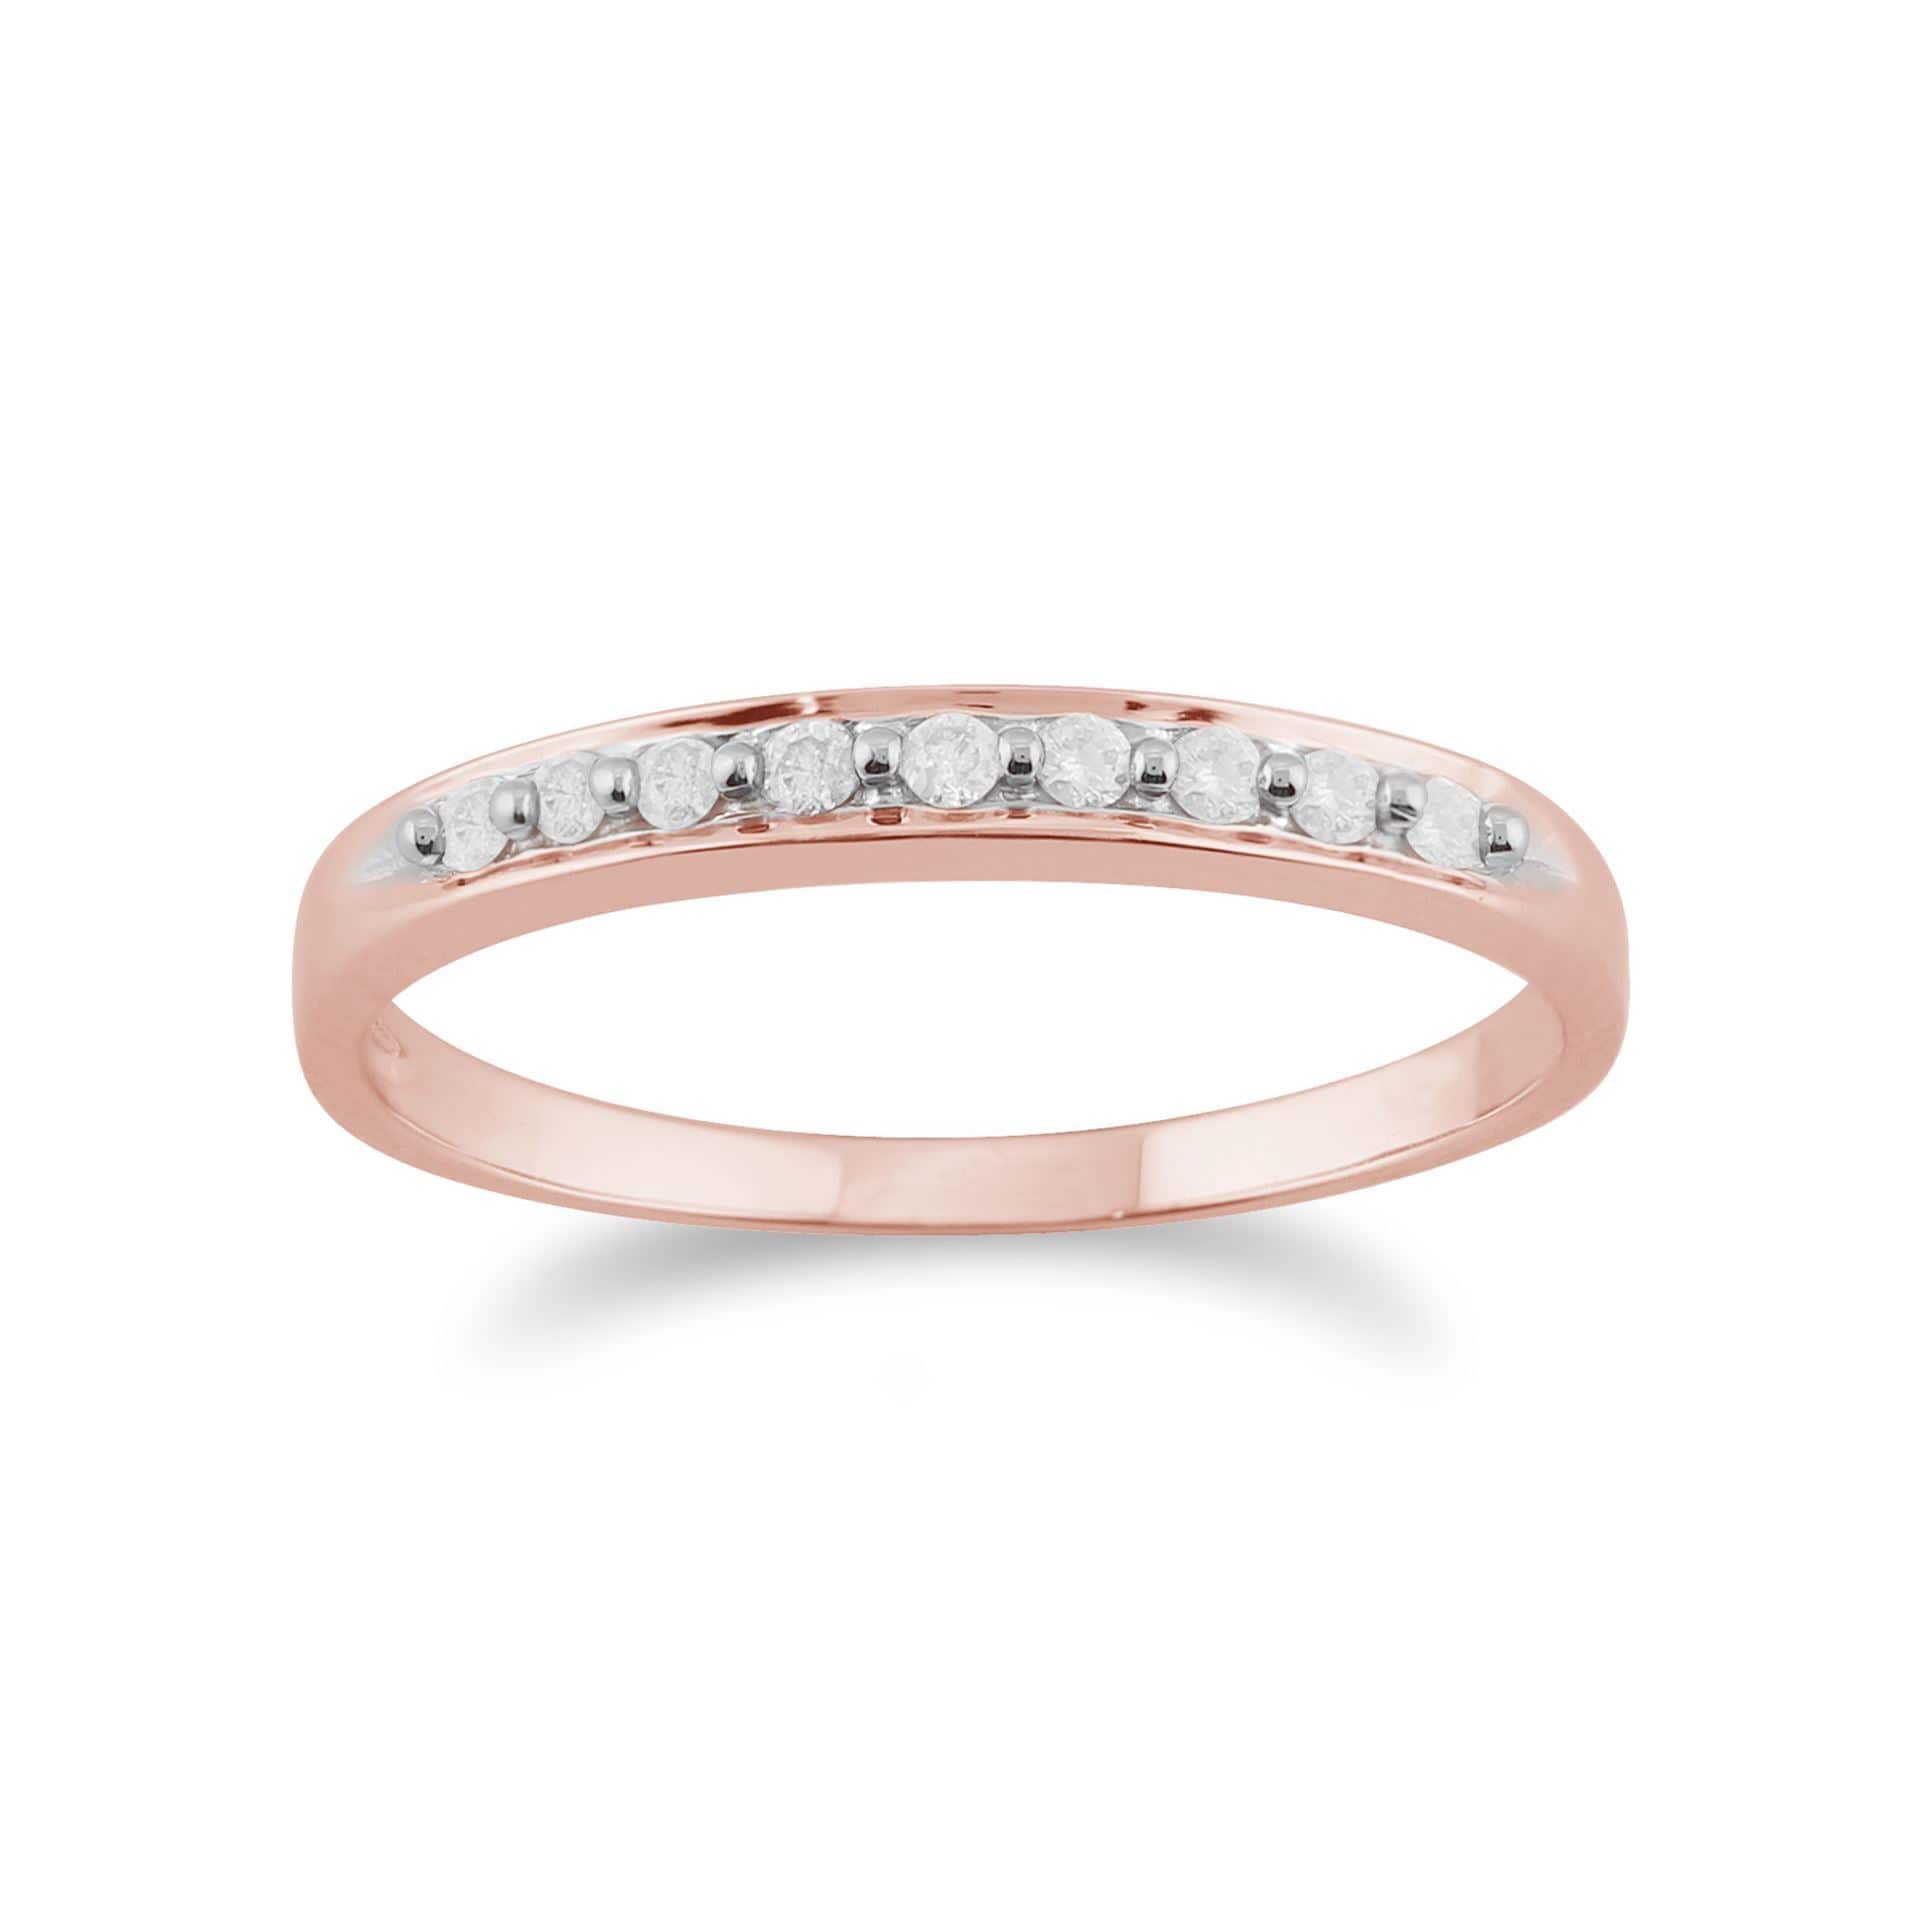 181R4231039 Classic Round Diamond Eternity Ring in 9ct Rose Gold 1